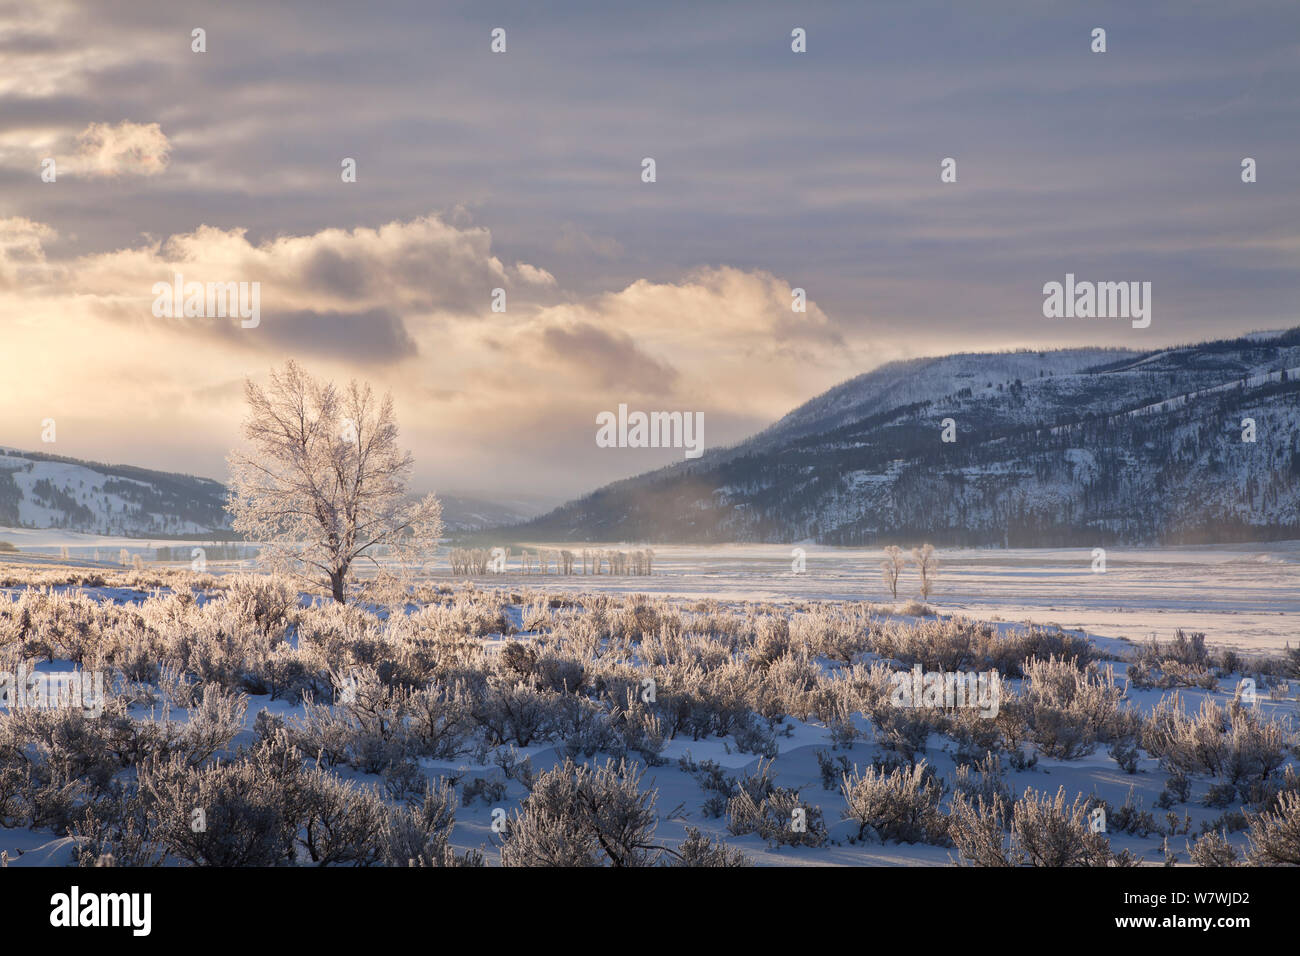 Sunrise over the Lamar Valley in winter, Yellowstone National Park, Wyoming, USA. December 2013. Stock Photo